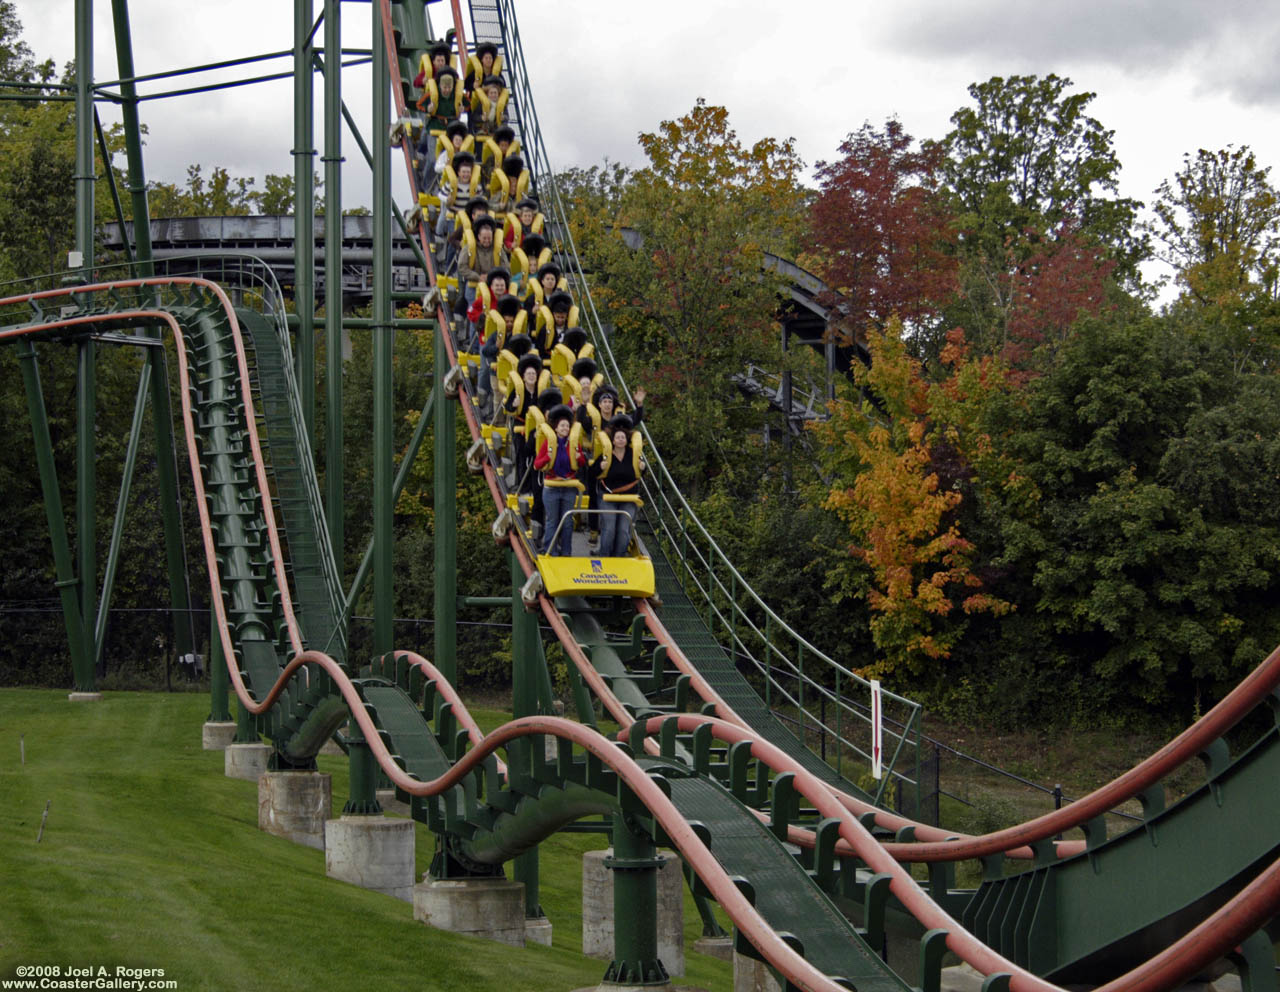 First drop on a roller coaster with fall colors in the trees